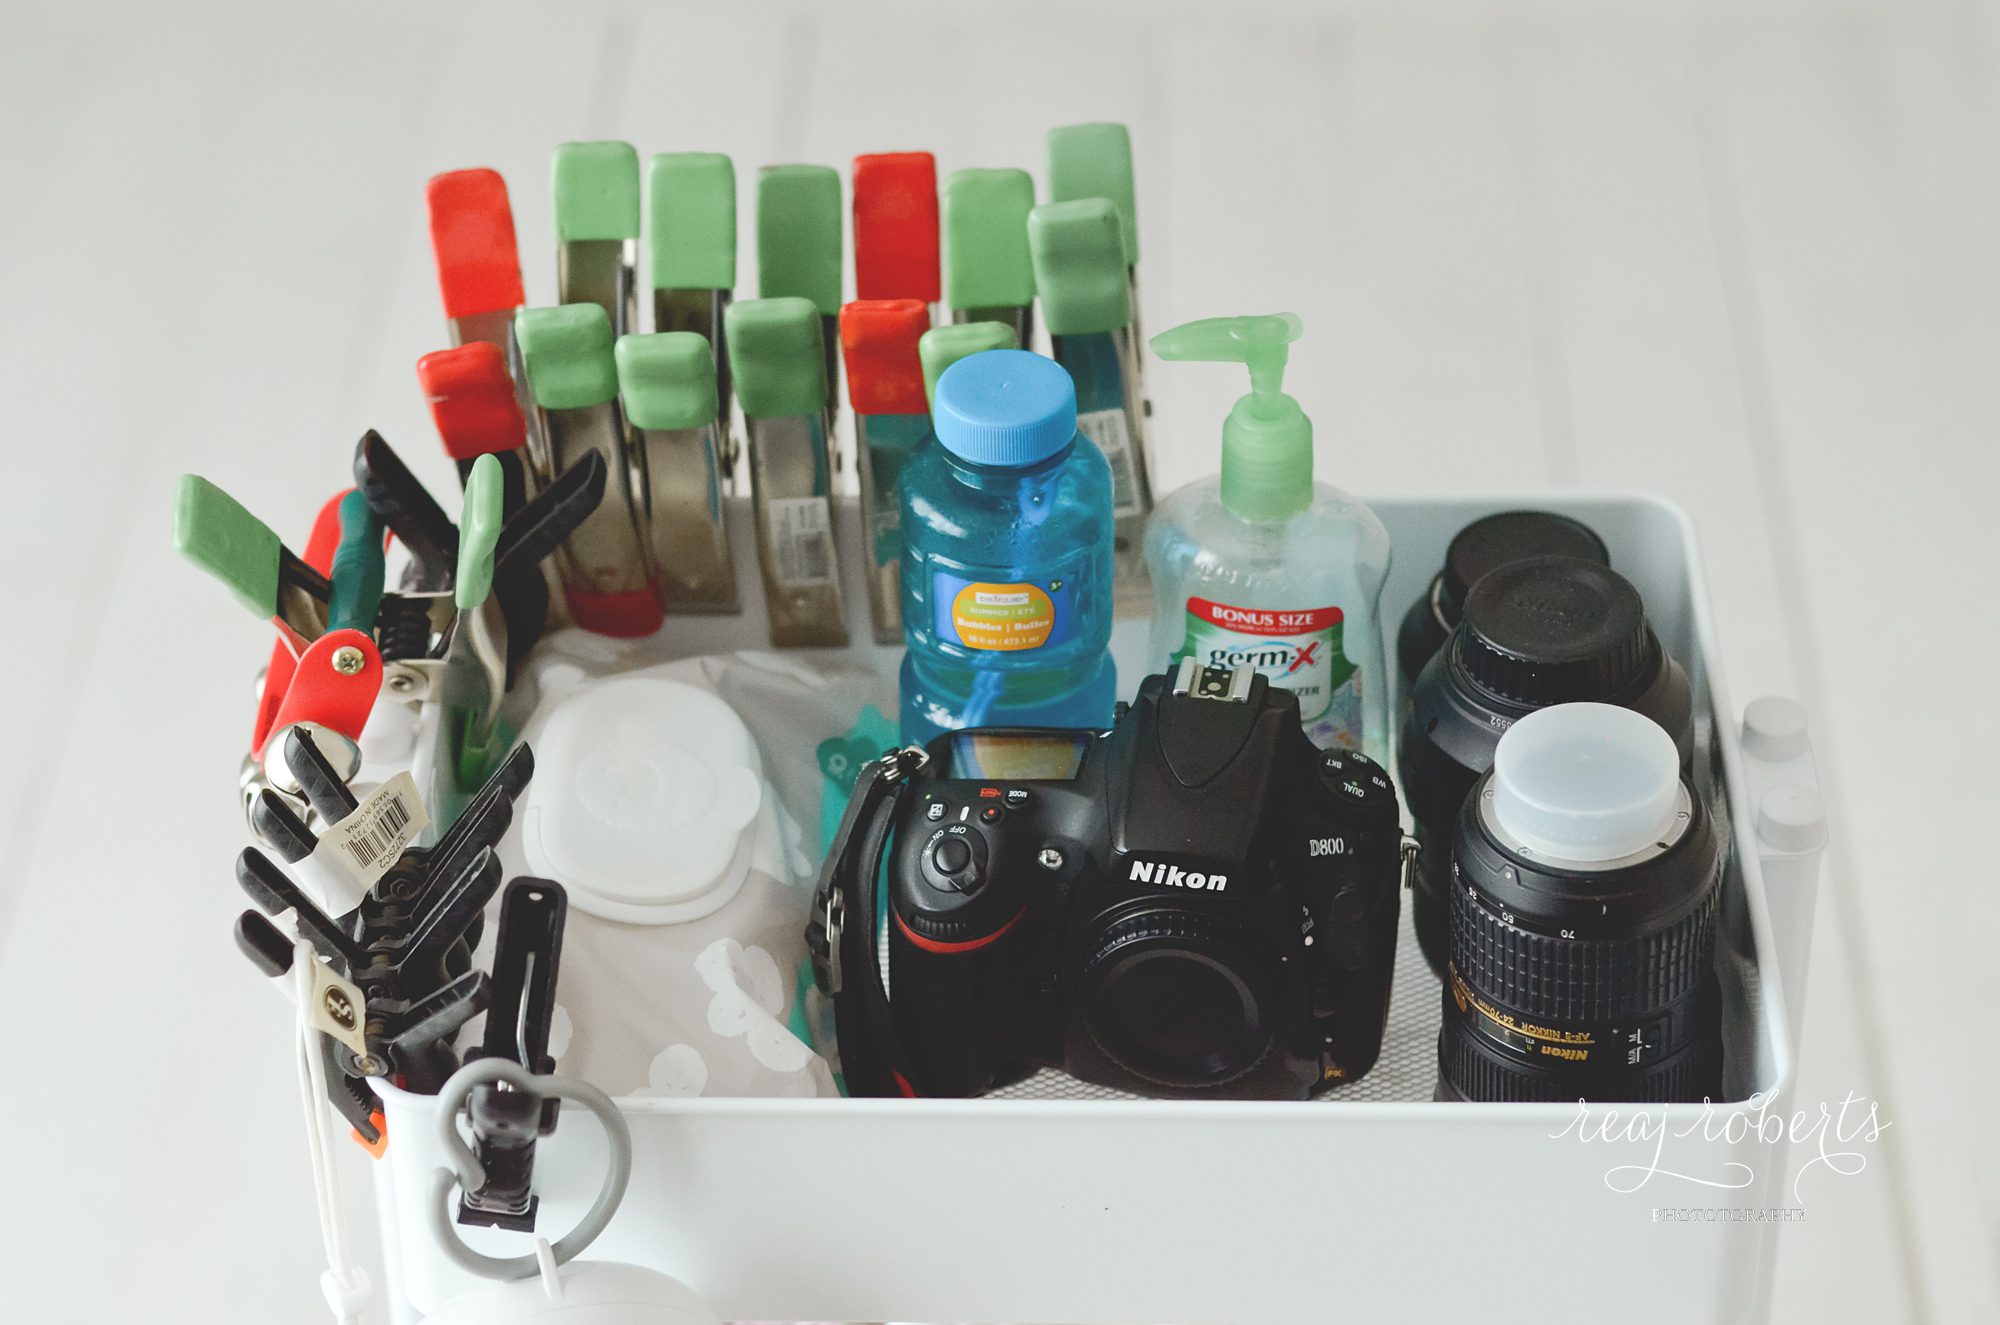 Perfect Ways to Use a Utility Cart | Reaj Roberts Photography